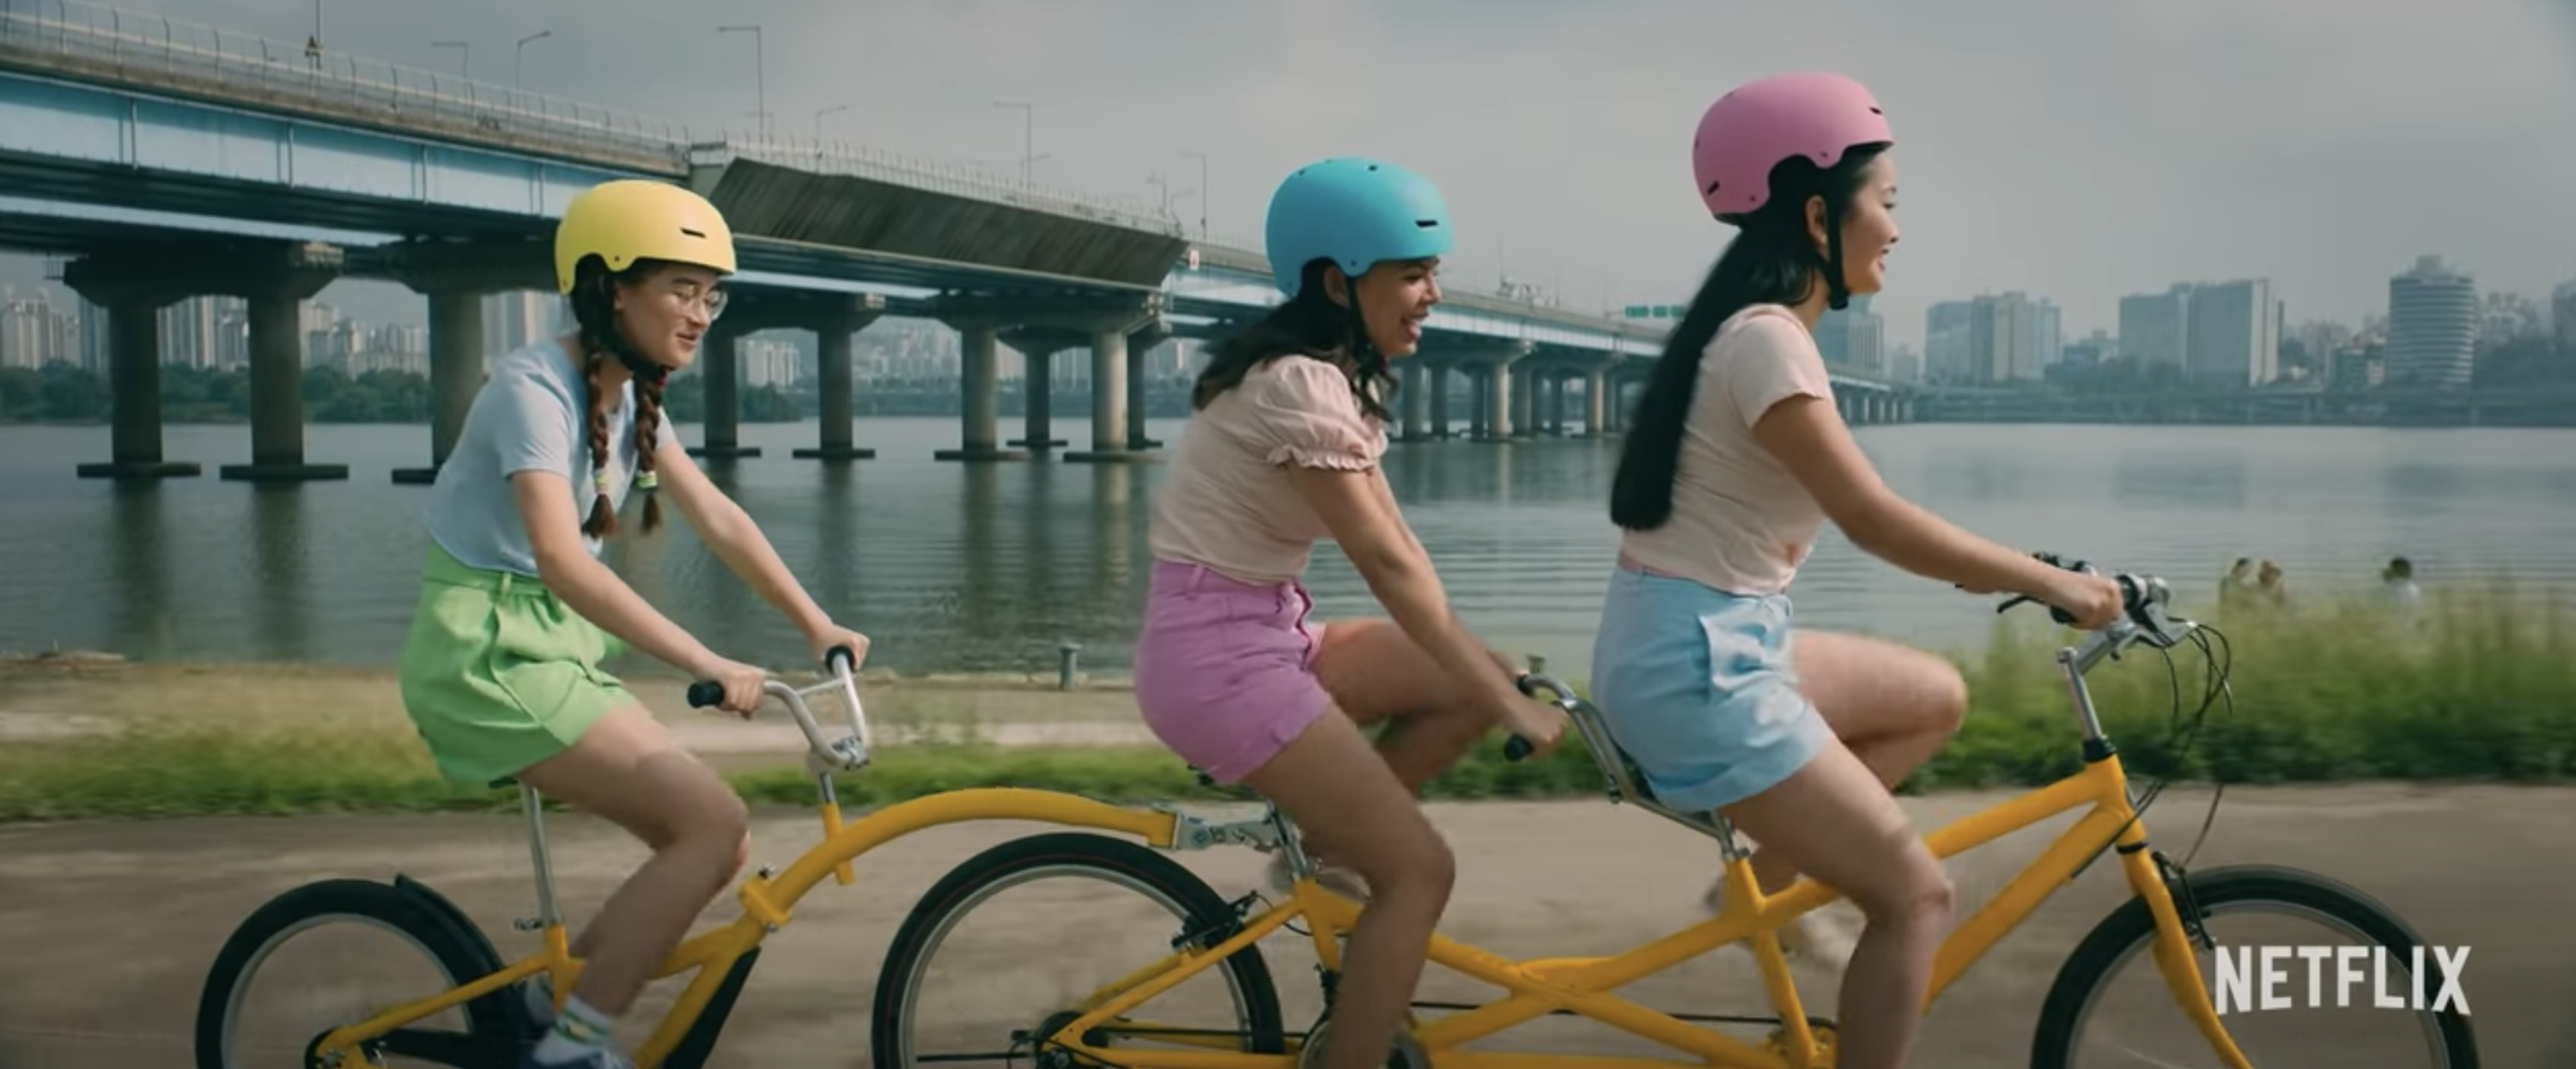 Lara Jean bicycle riding with friends